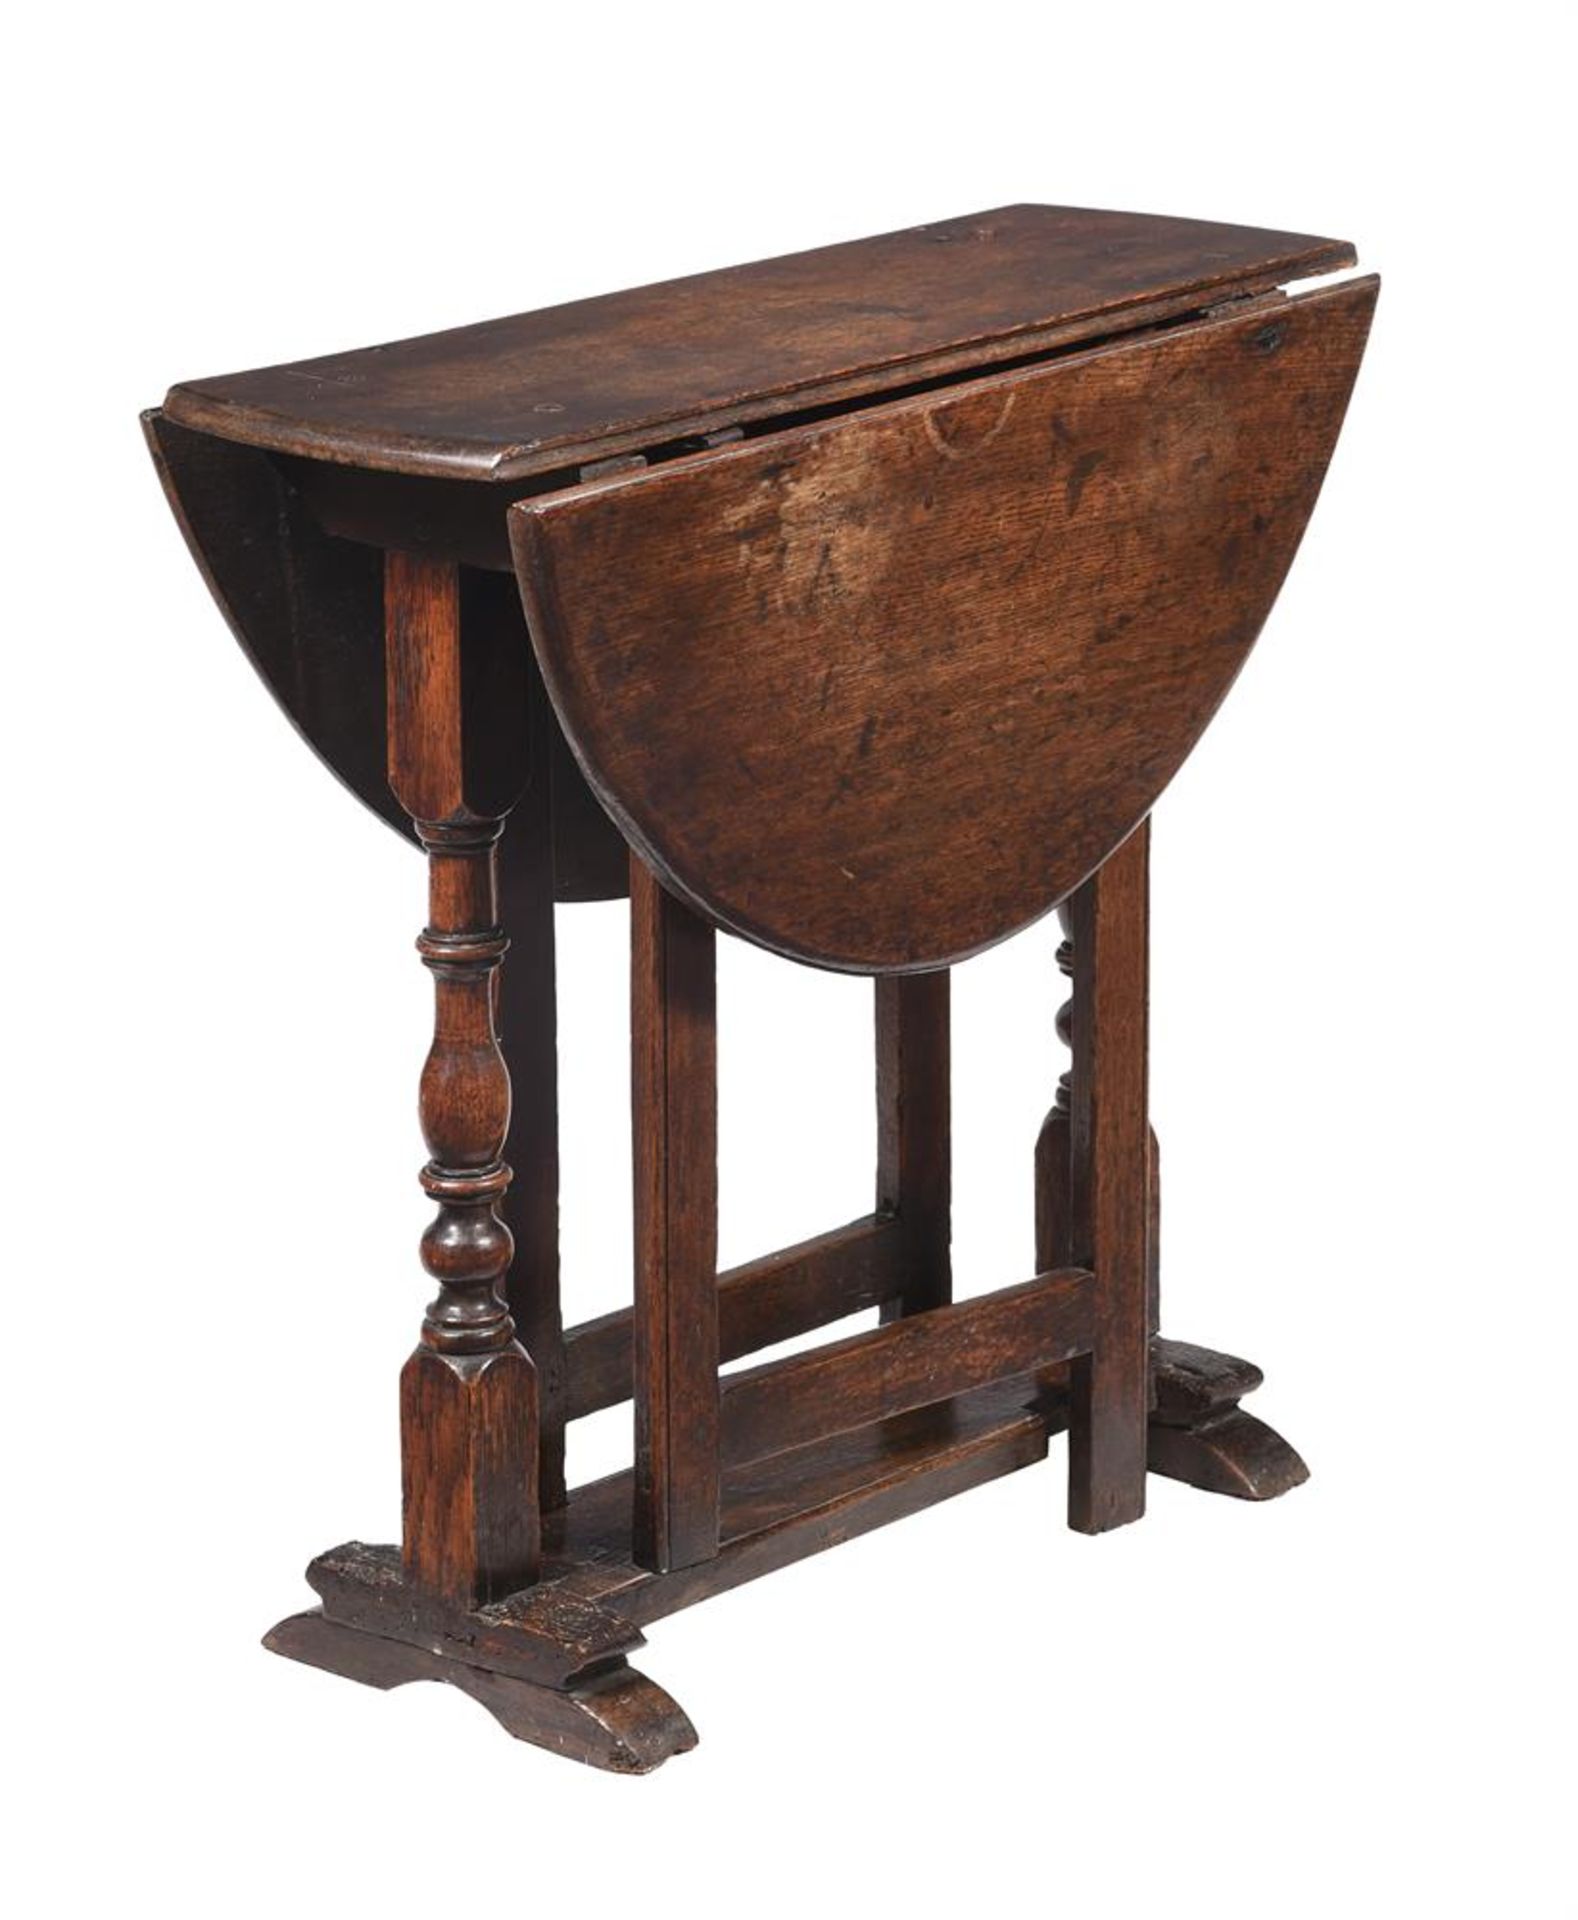 A WILLIAM AND MARY OAK GATE-LEG TABLE - Image 2 of 3